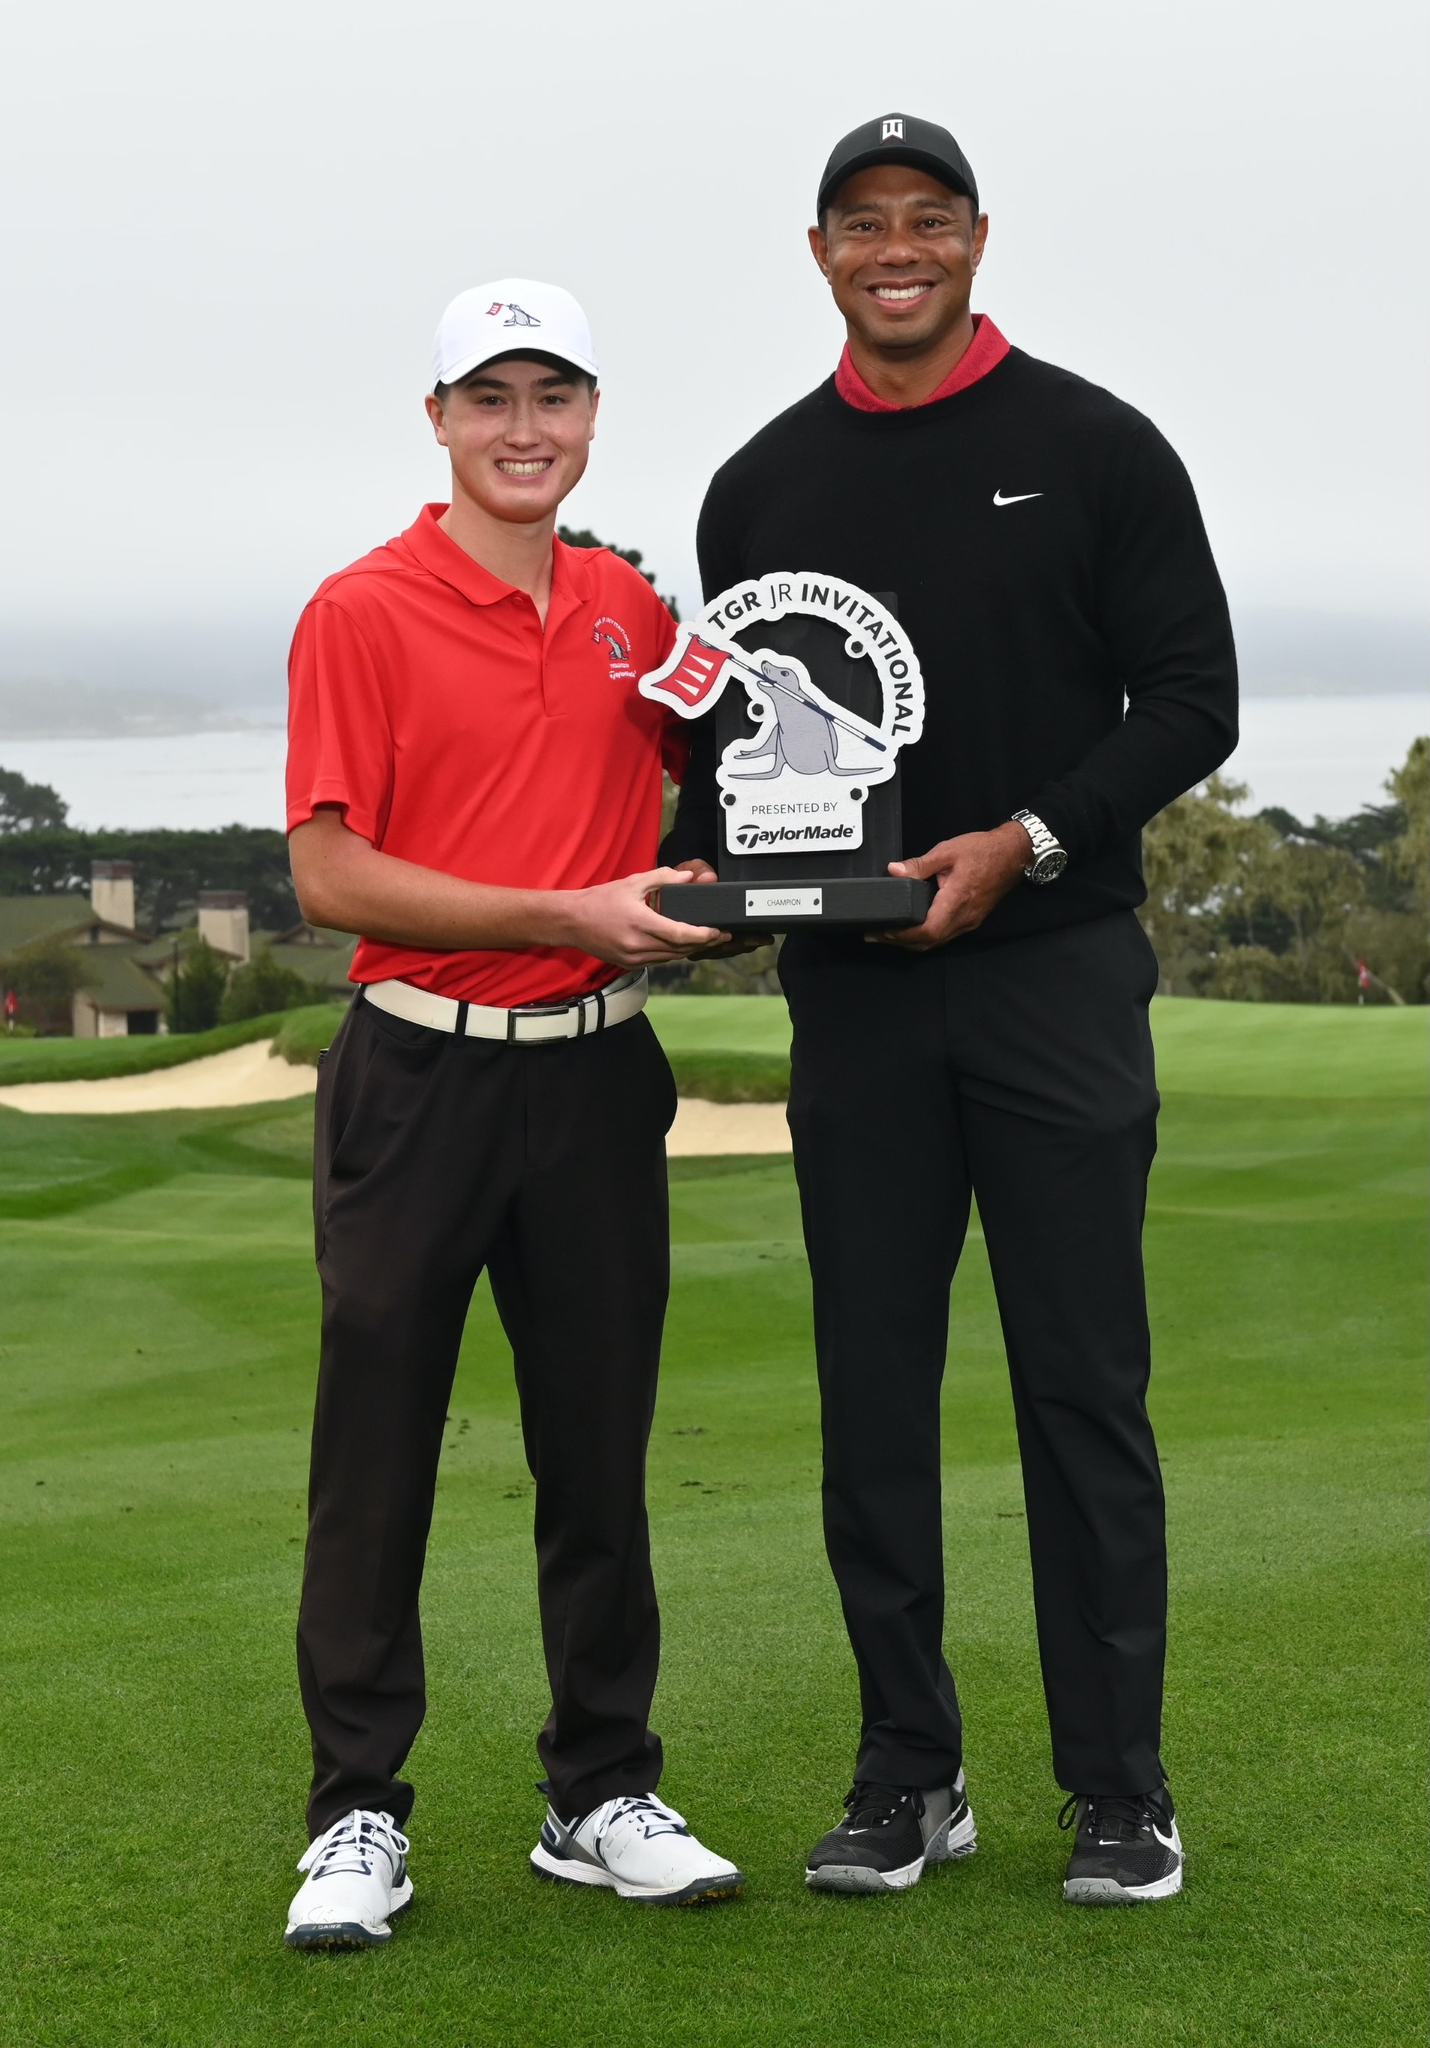 Players Spotlight: Young Golfers Win with SQAIRZ